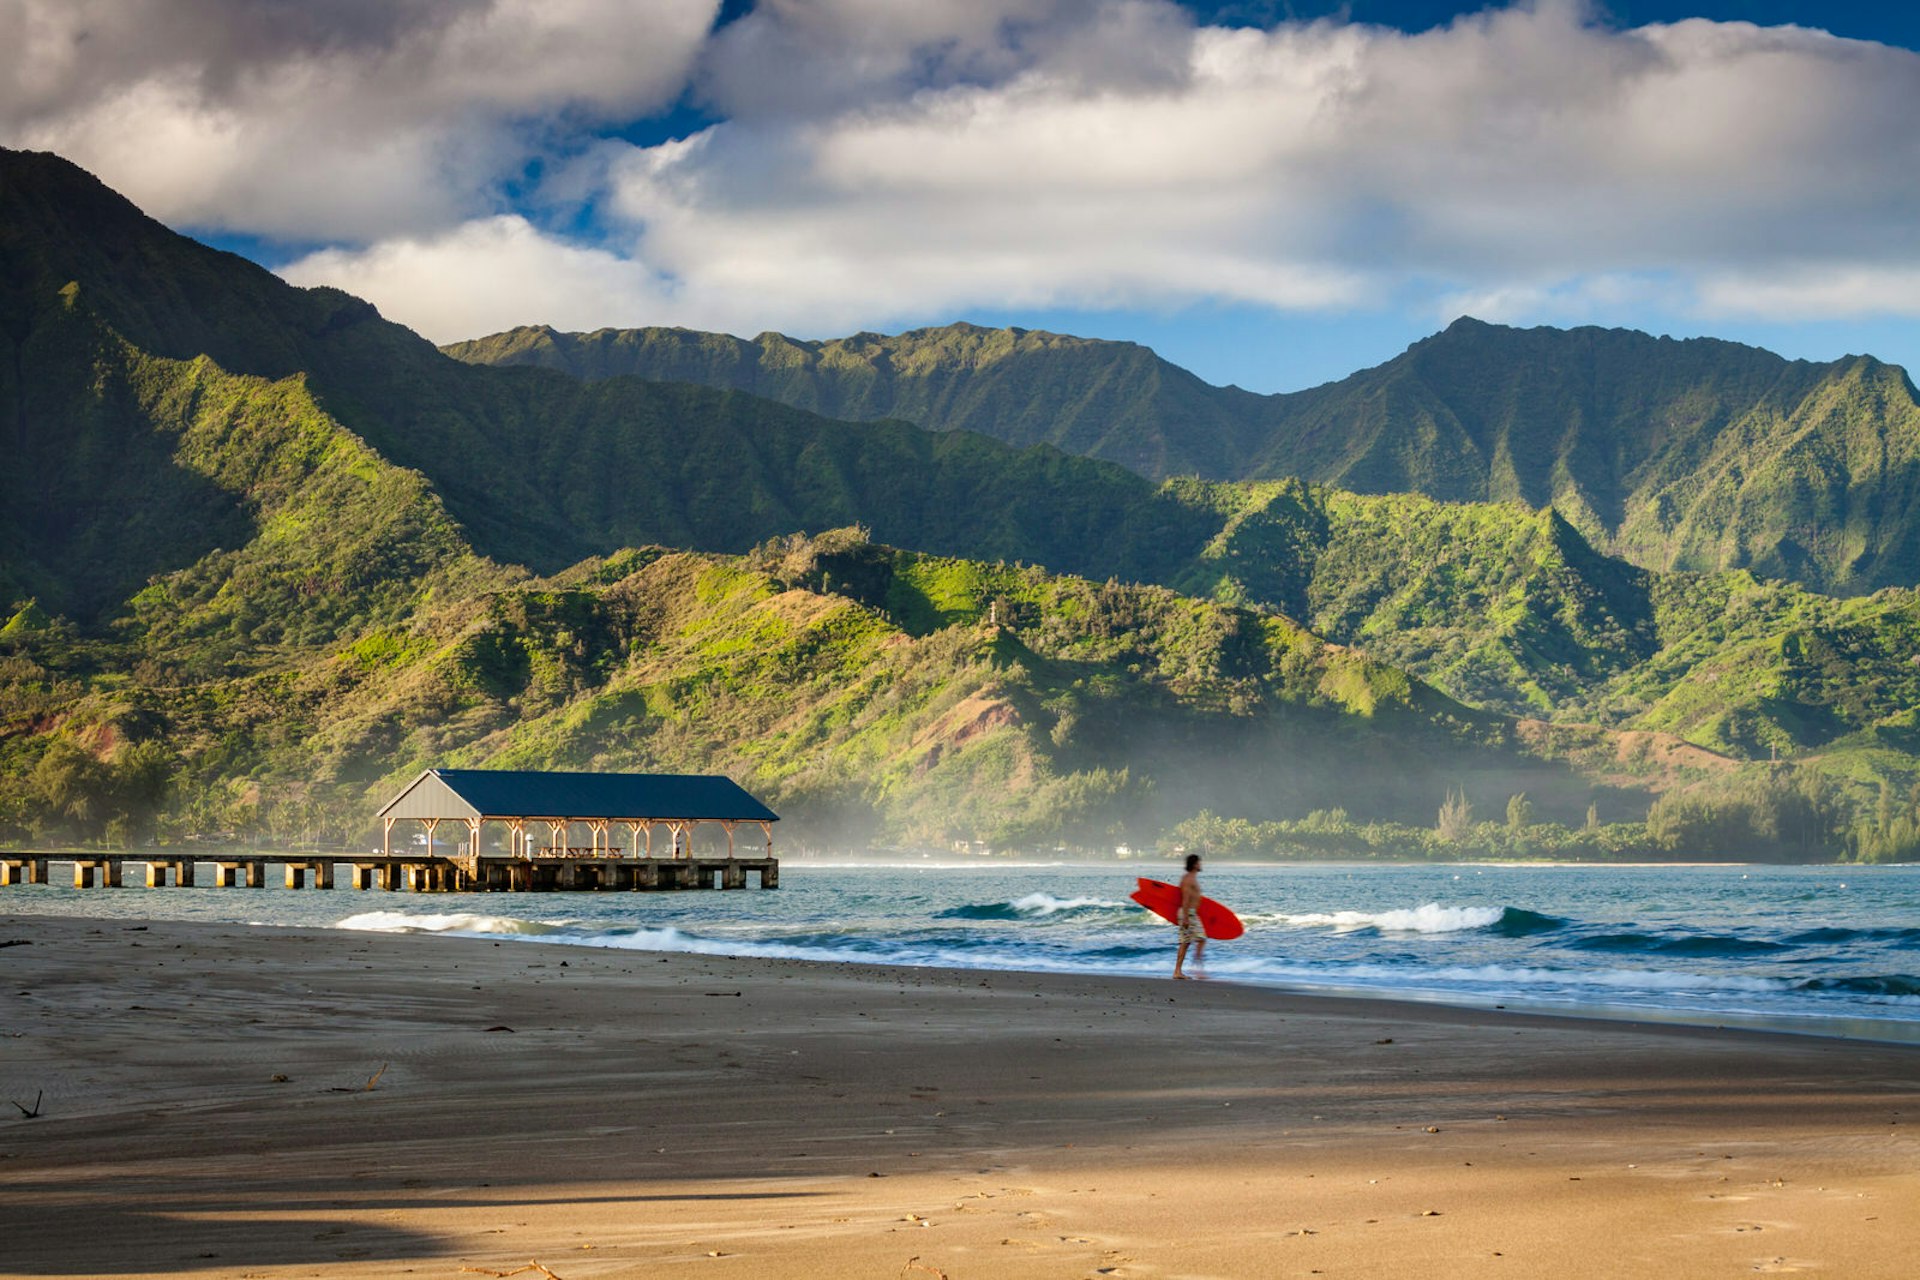 The calm waters near Hanalei Pier are perfect for young beachgoers © Glowing Earth Photography / 500px